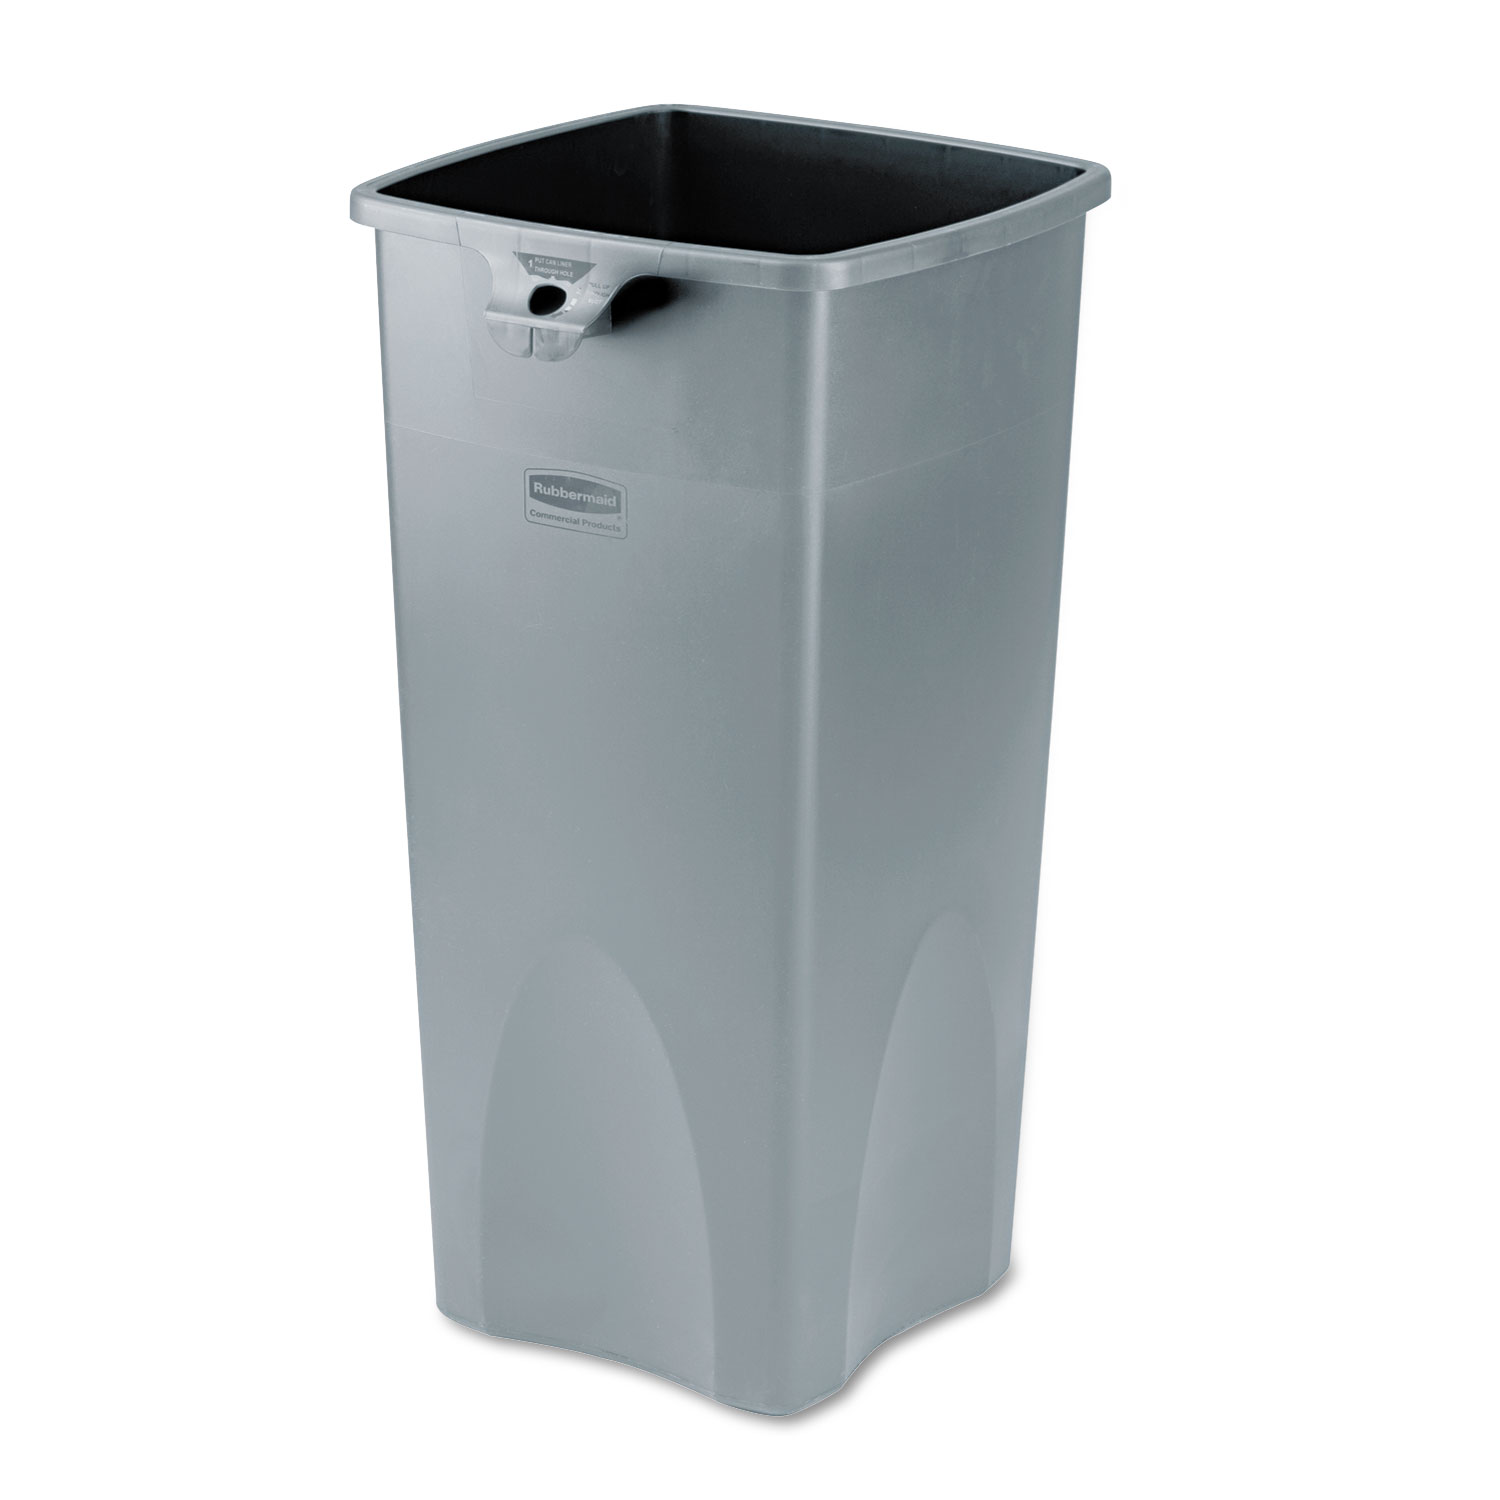  Rubbermaid Commercial FG356988GRAY Untouchable Square Waste Receptacle, Plastic, 23 gal, Gray (RCP356988GY) 